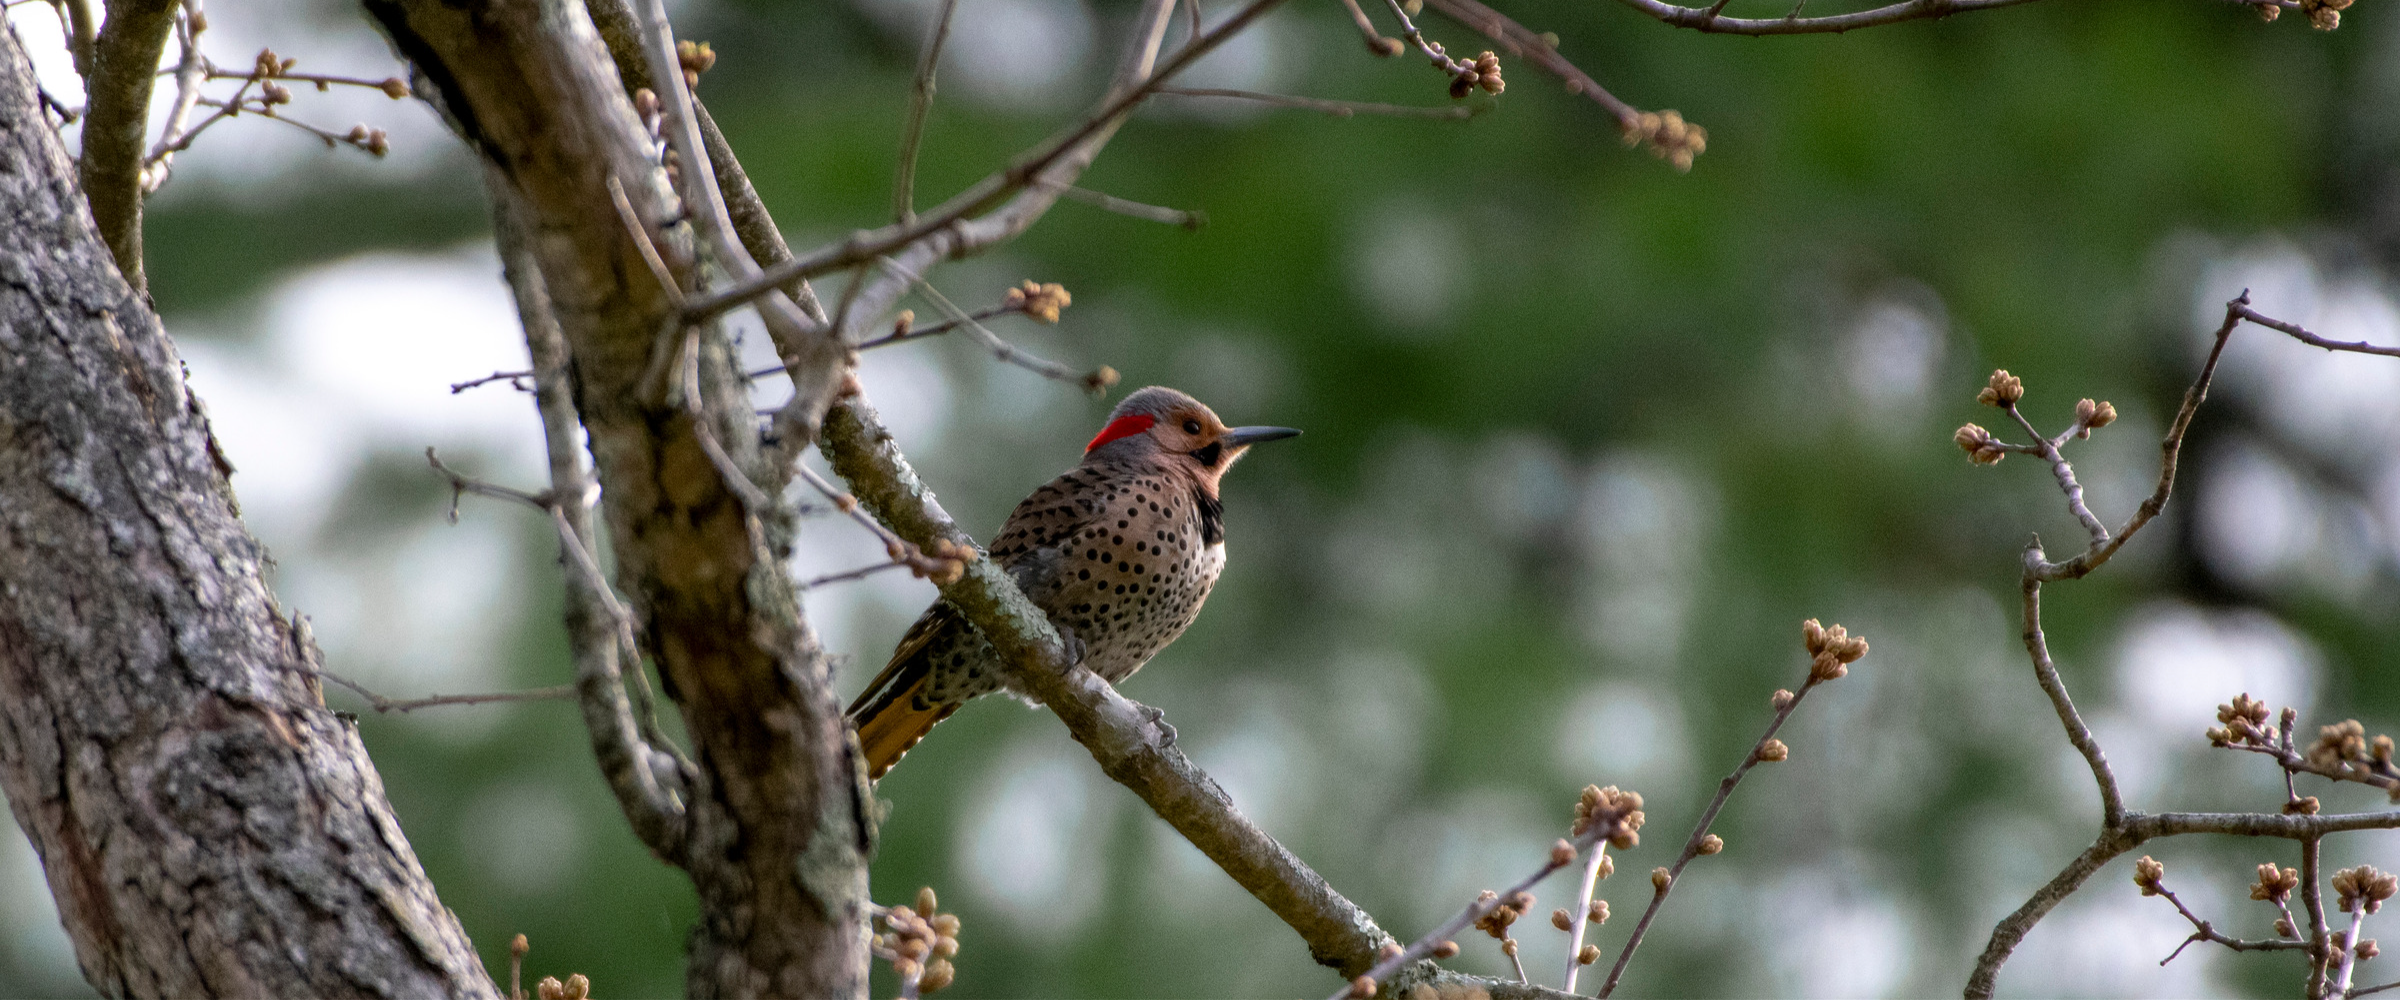 A Northern Flicker perches on a branch, looking to the right. The branches are leafless but have buds on them.